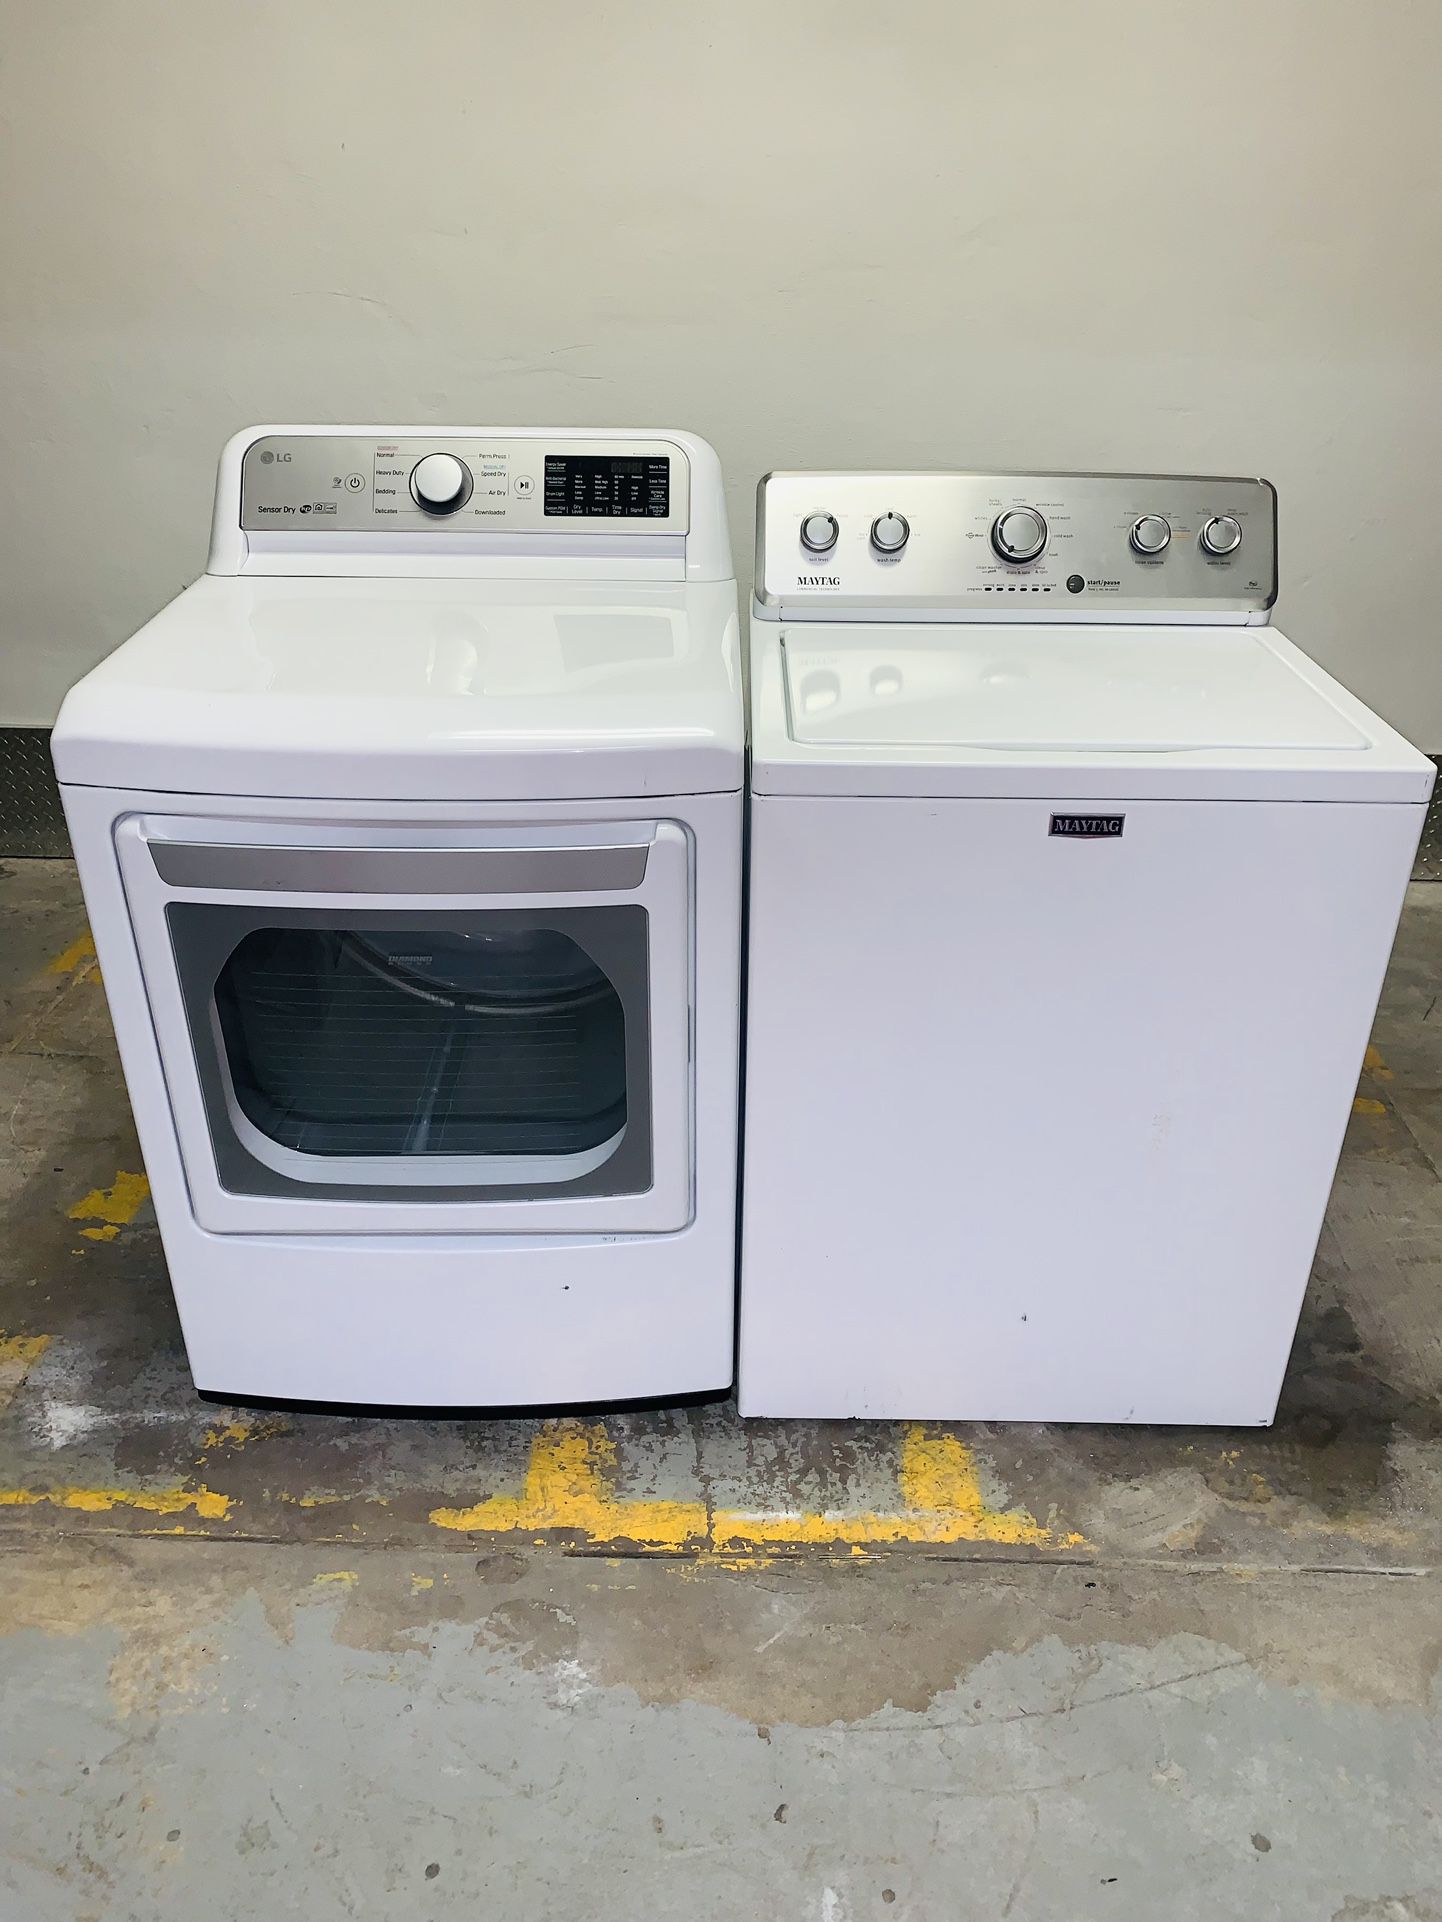 Maytag washer and LG dryer in very perfect condition a receipt for 90 days warranty